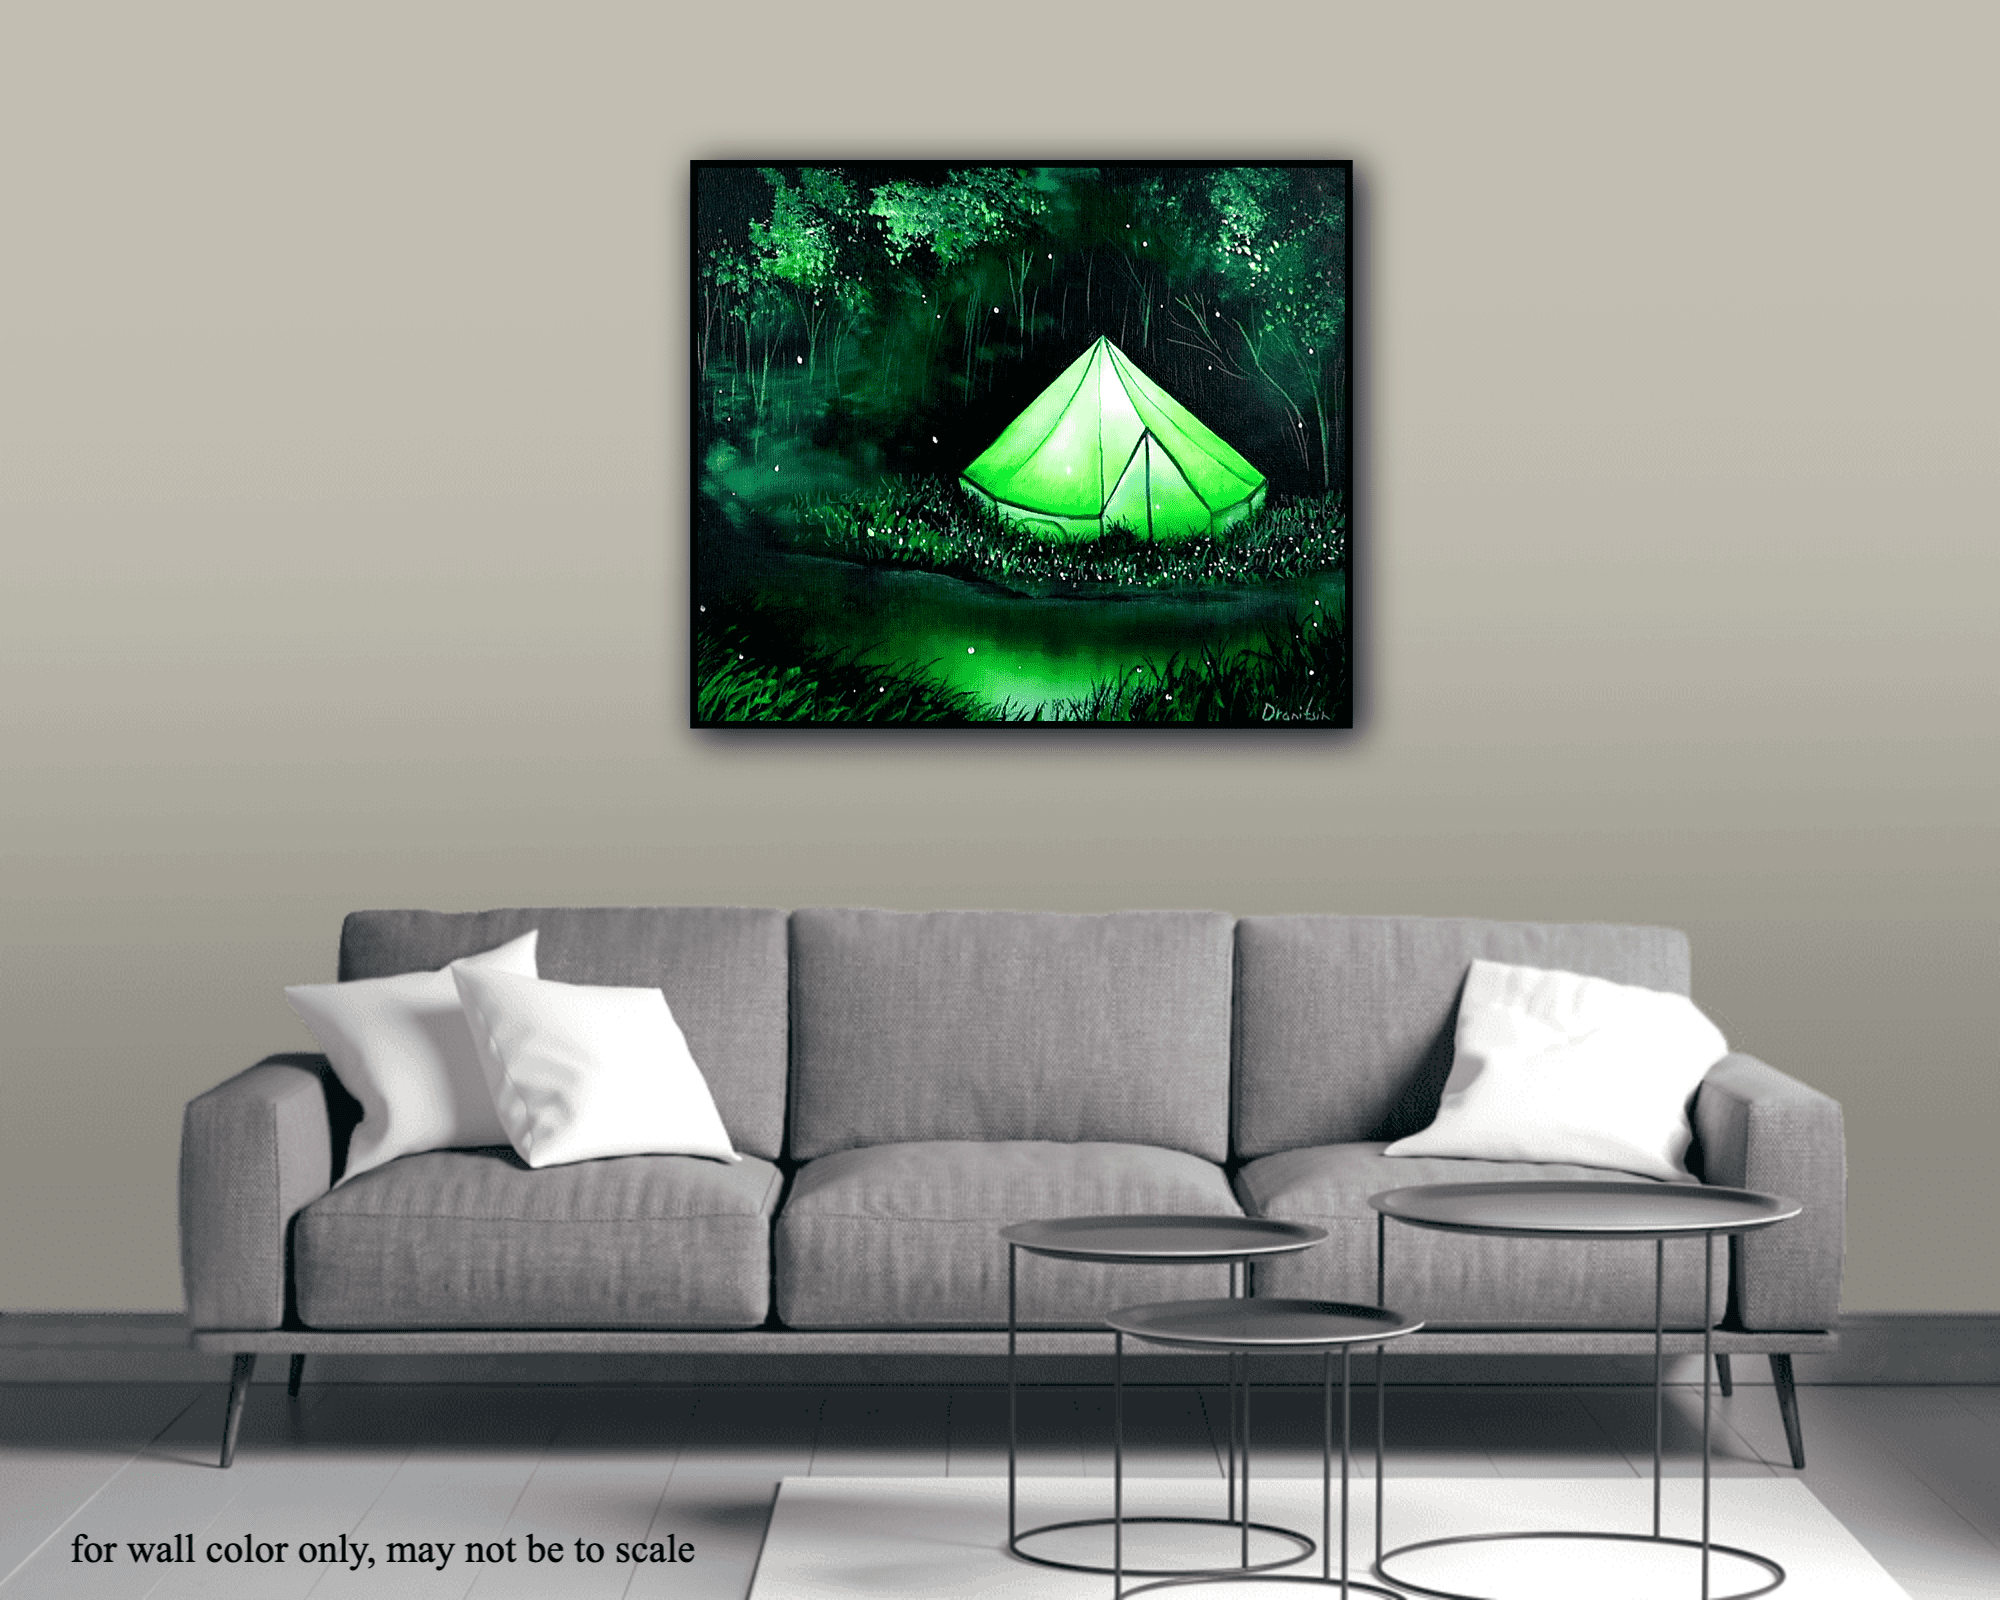 light up the night glowing tent by the pond acrylic landscape painting by urartstudio.com 1